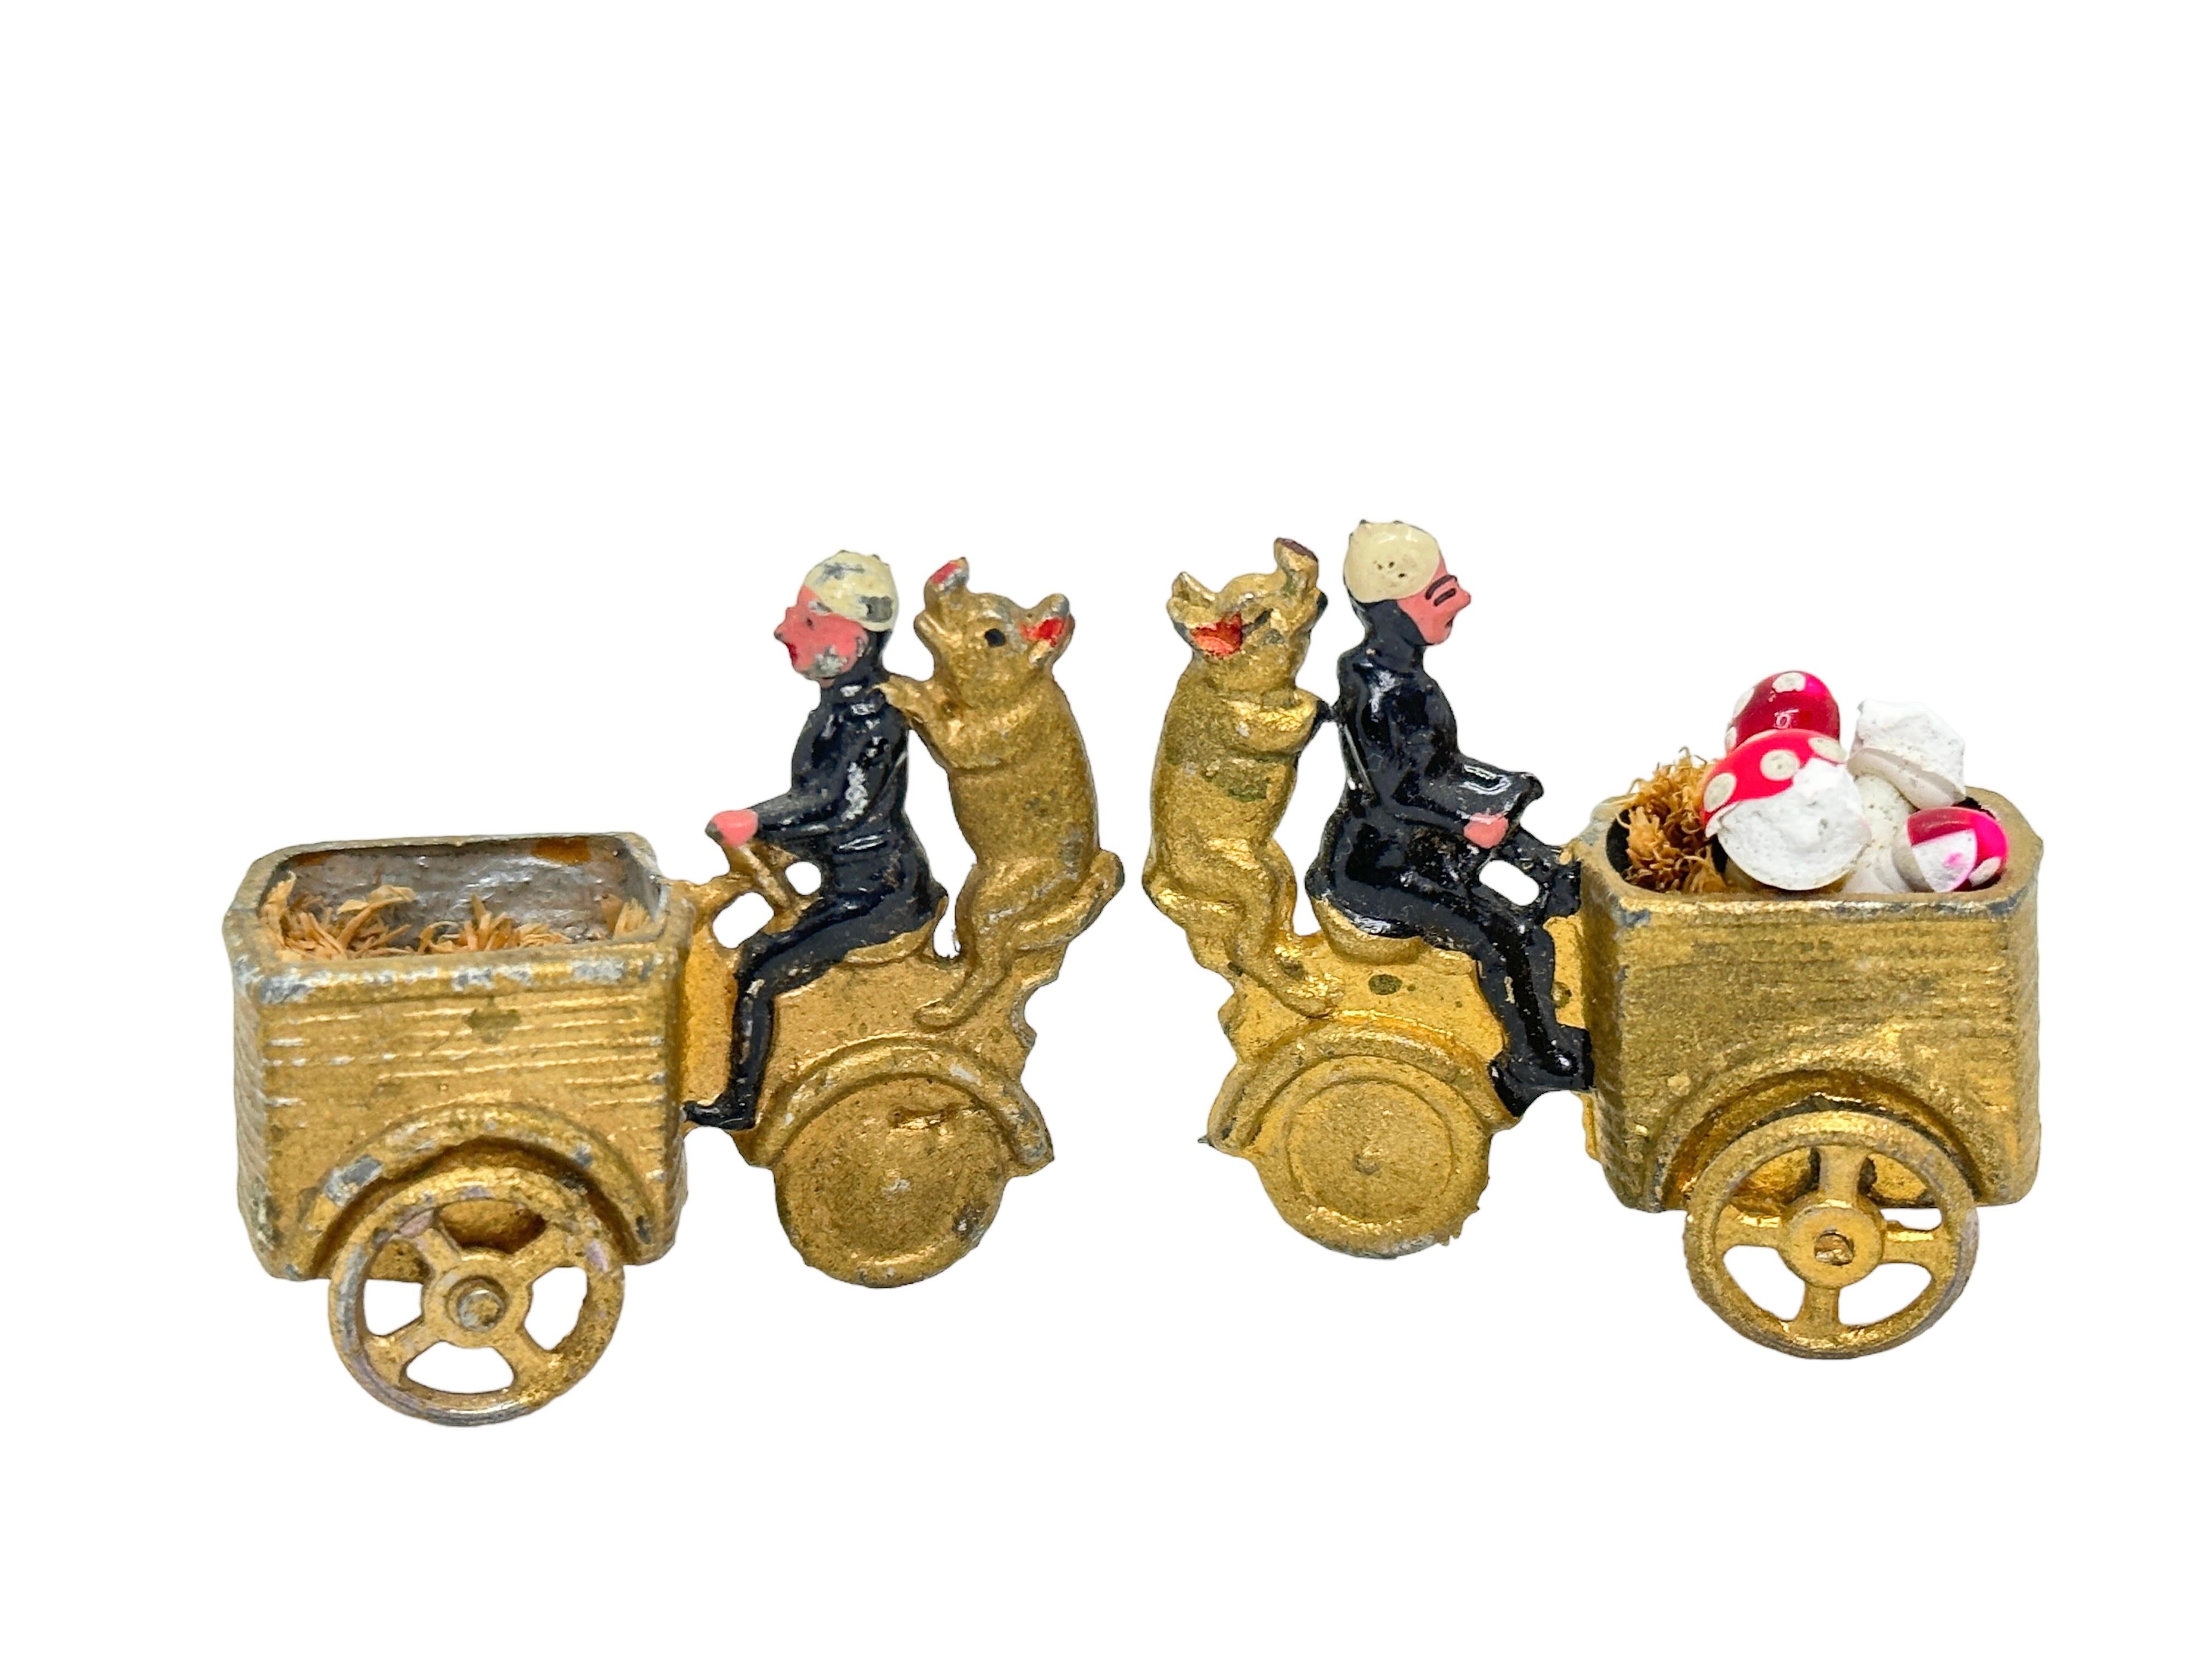 Folk Art Collection of Pig & Chimney Sweep Lucky Charm Figurines, Antique Austria, 1900s